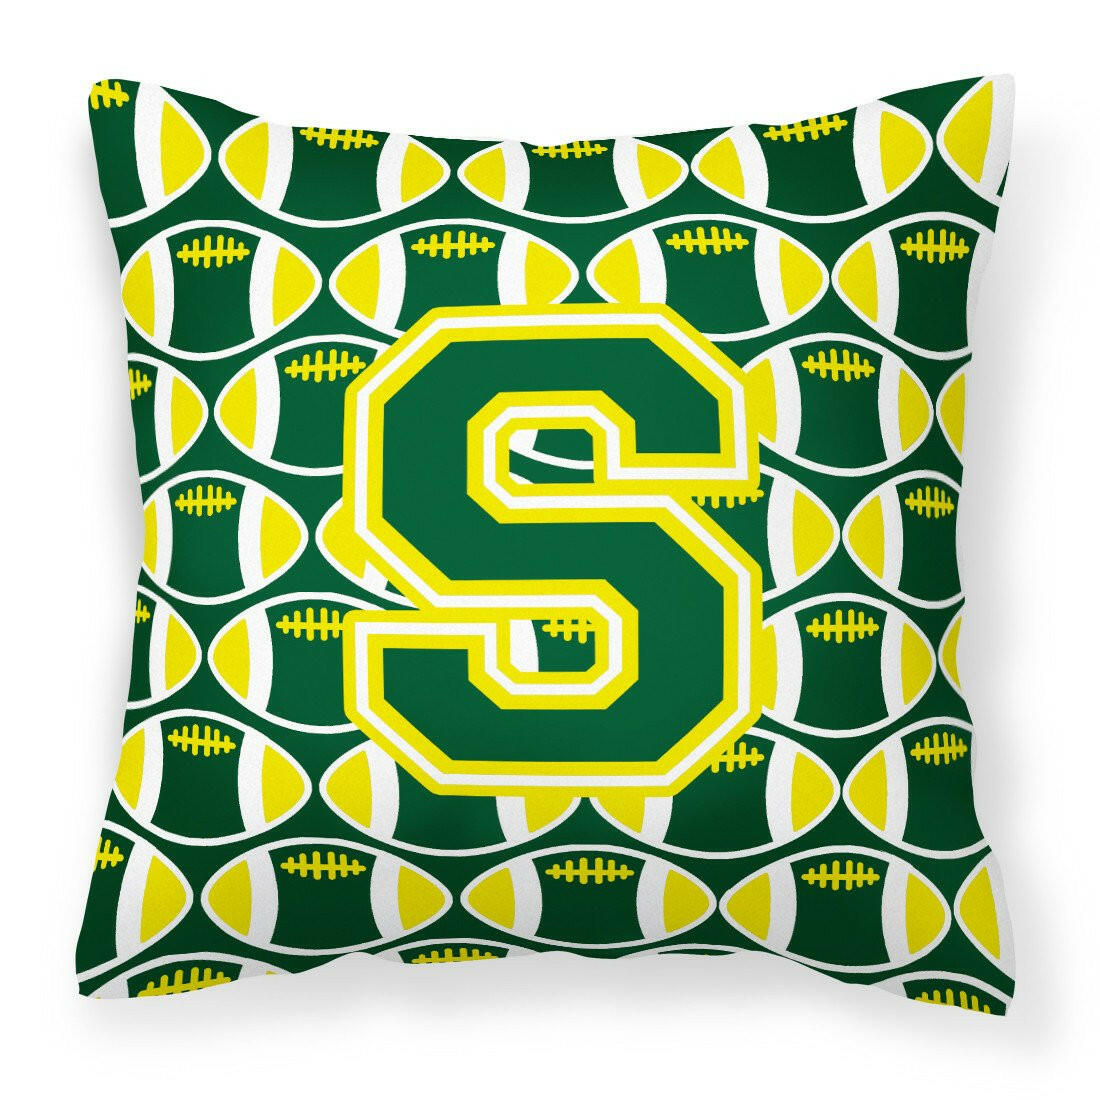 Letter S Football Green and Yellow Fabric Decorative Pillow CJ1075-SPW1414 by Caroline's Treasures